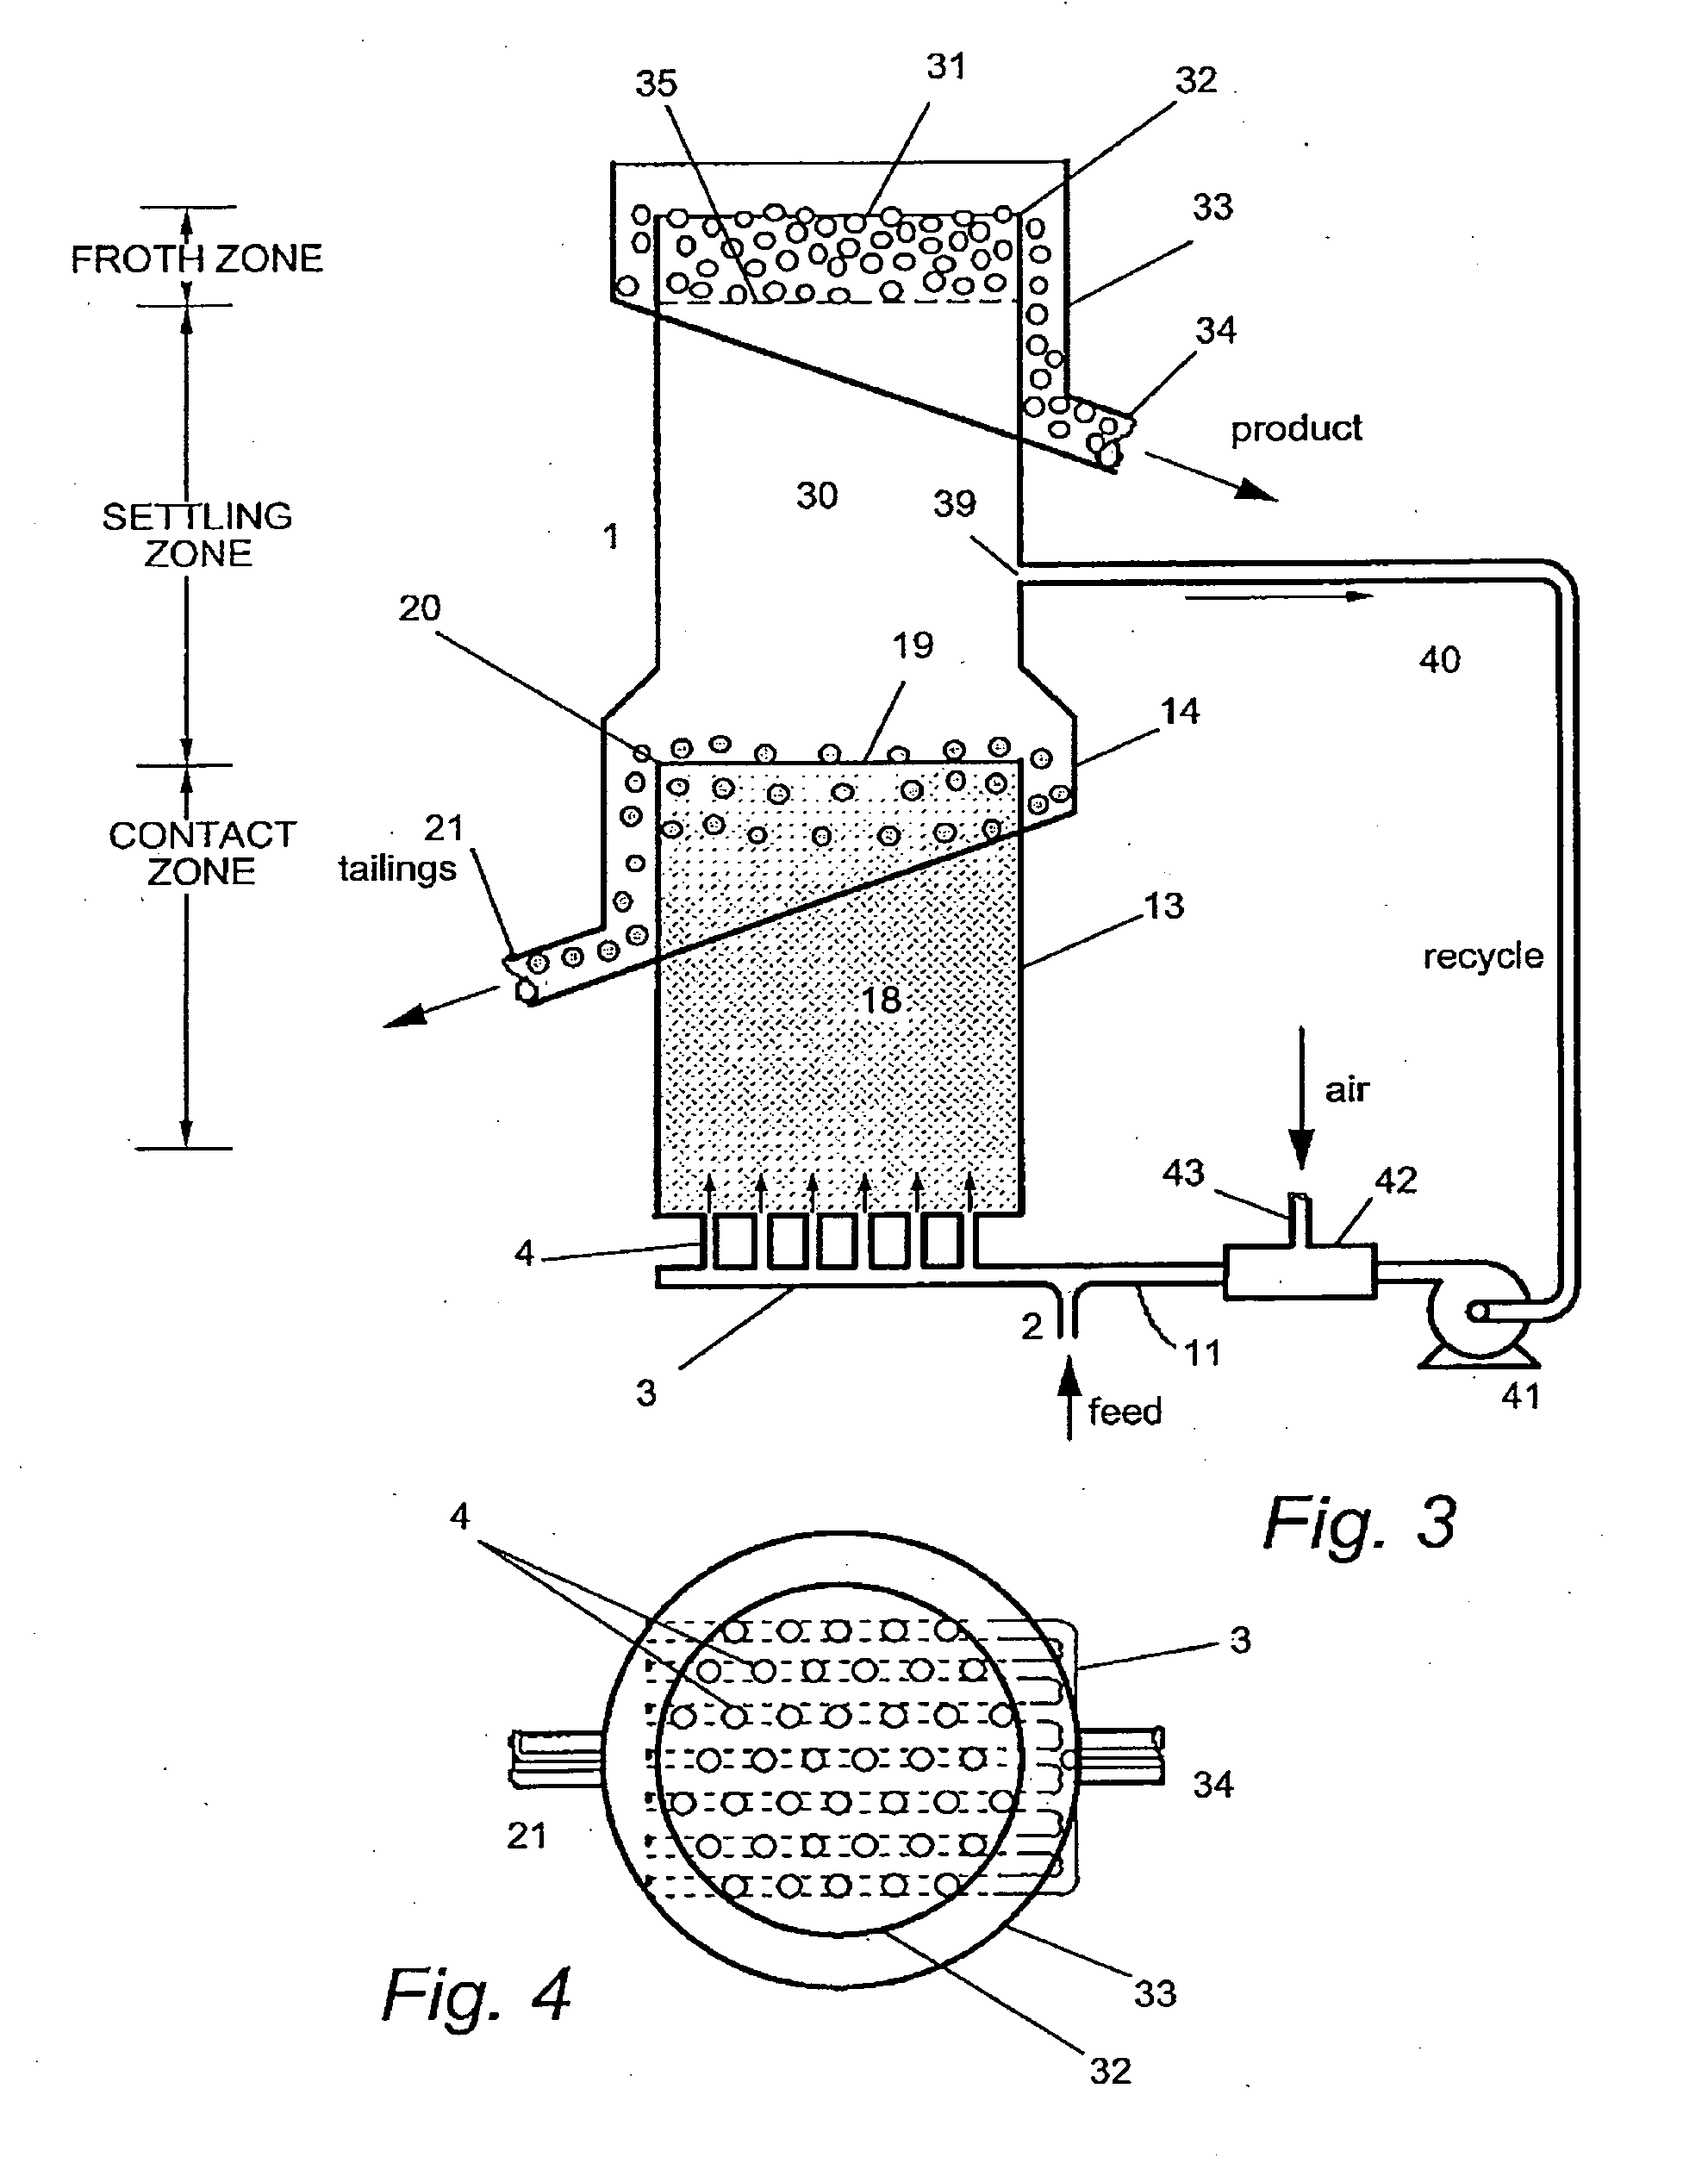 Method and apparatus for flotation in a fluidized bed